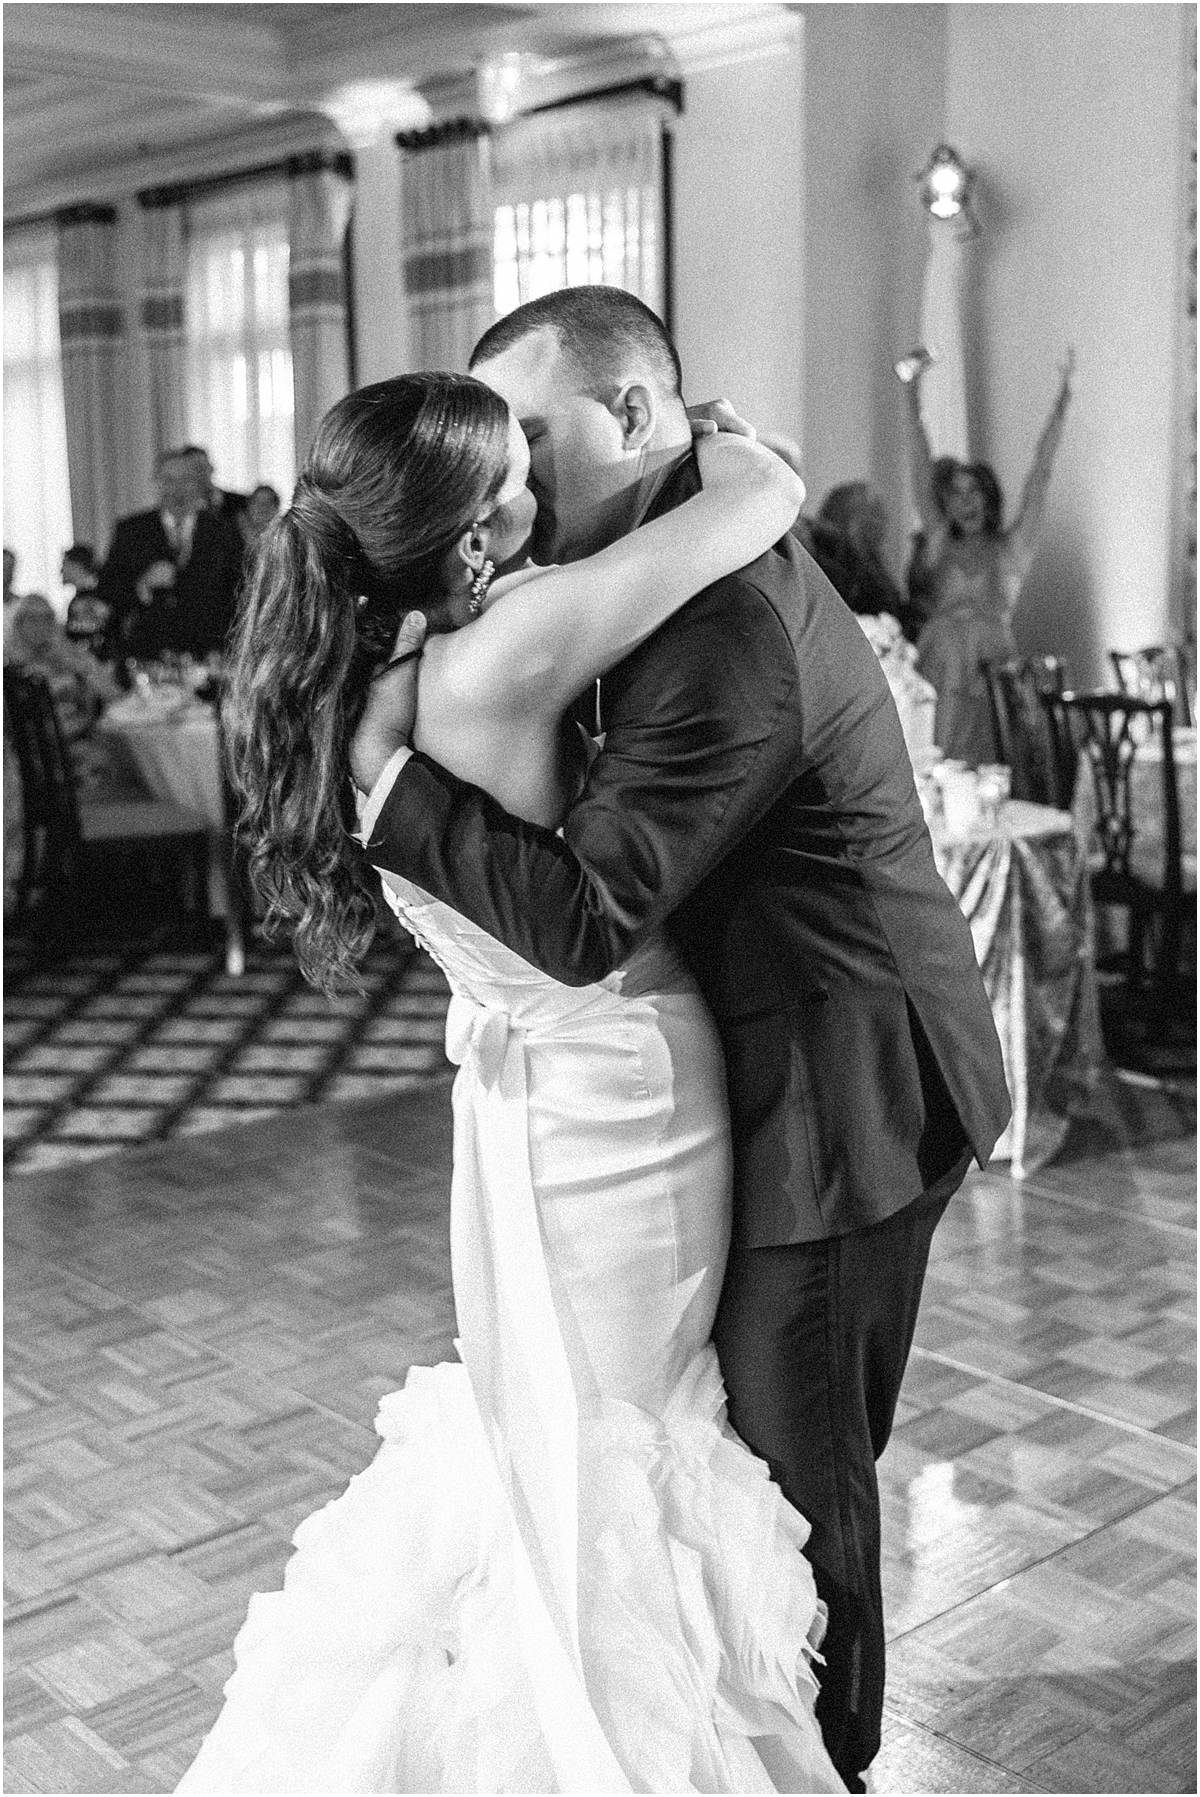 newlyweds dance together and share intimate moment on the dancefloor 